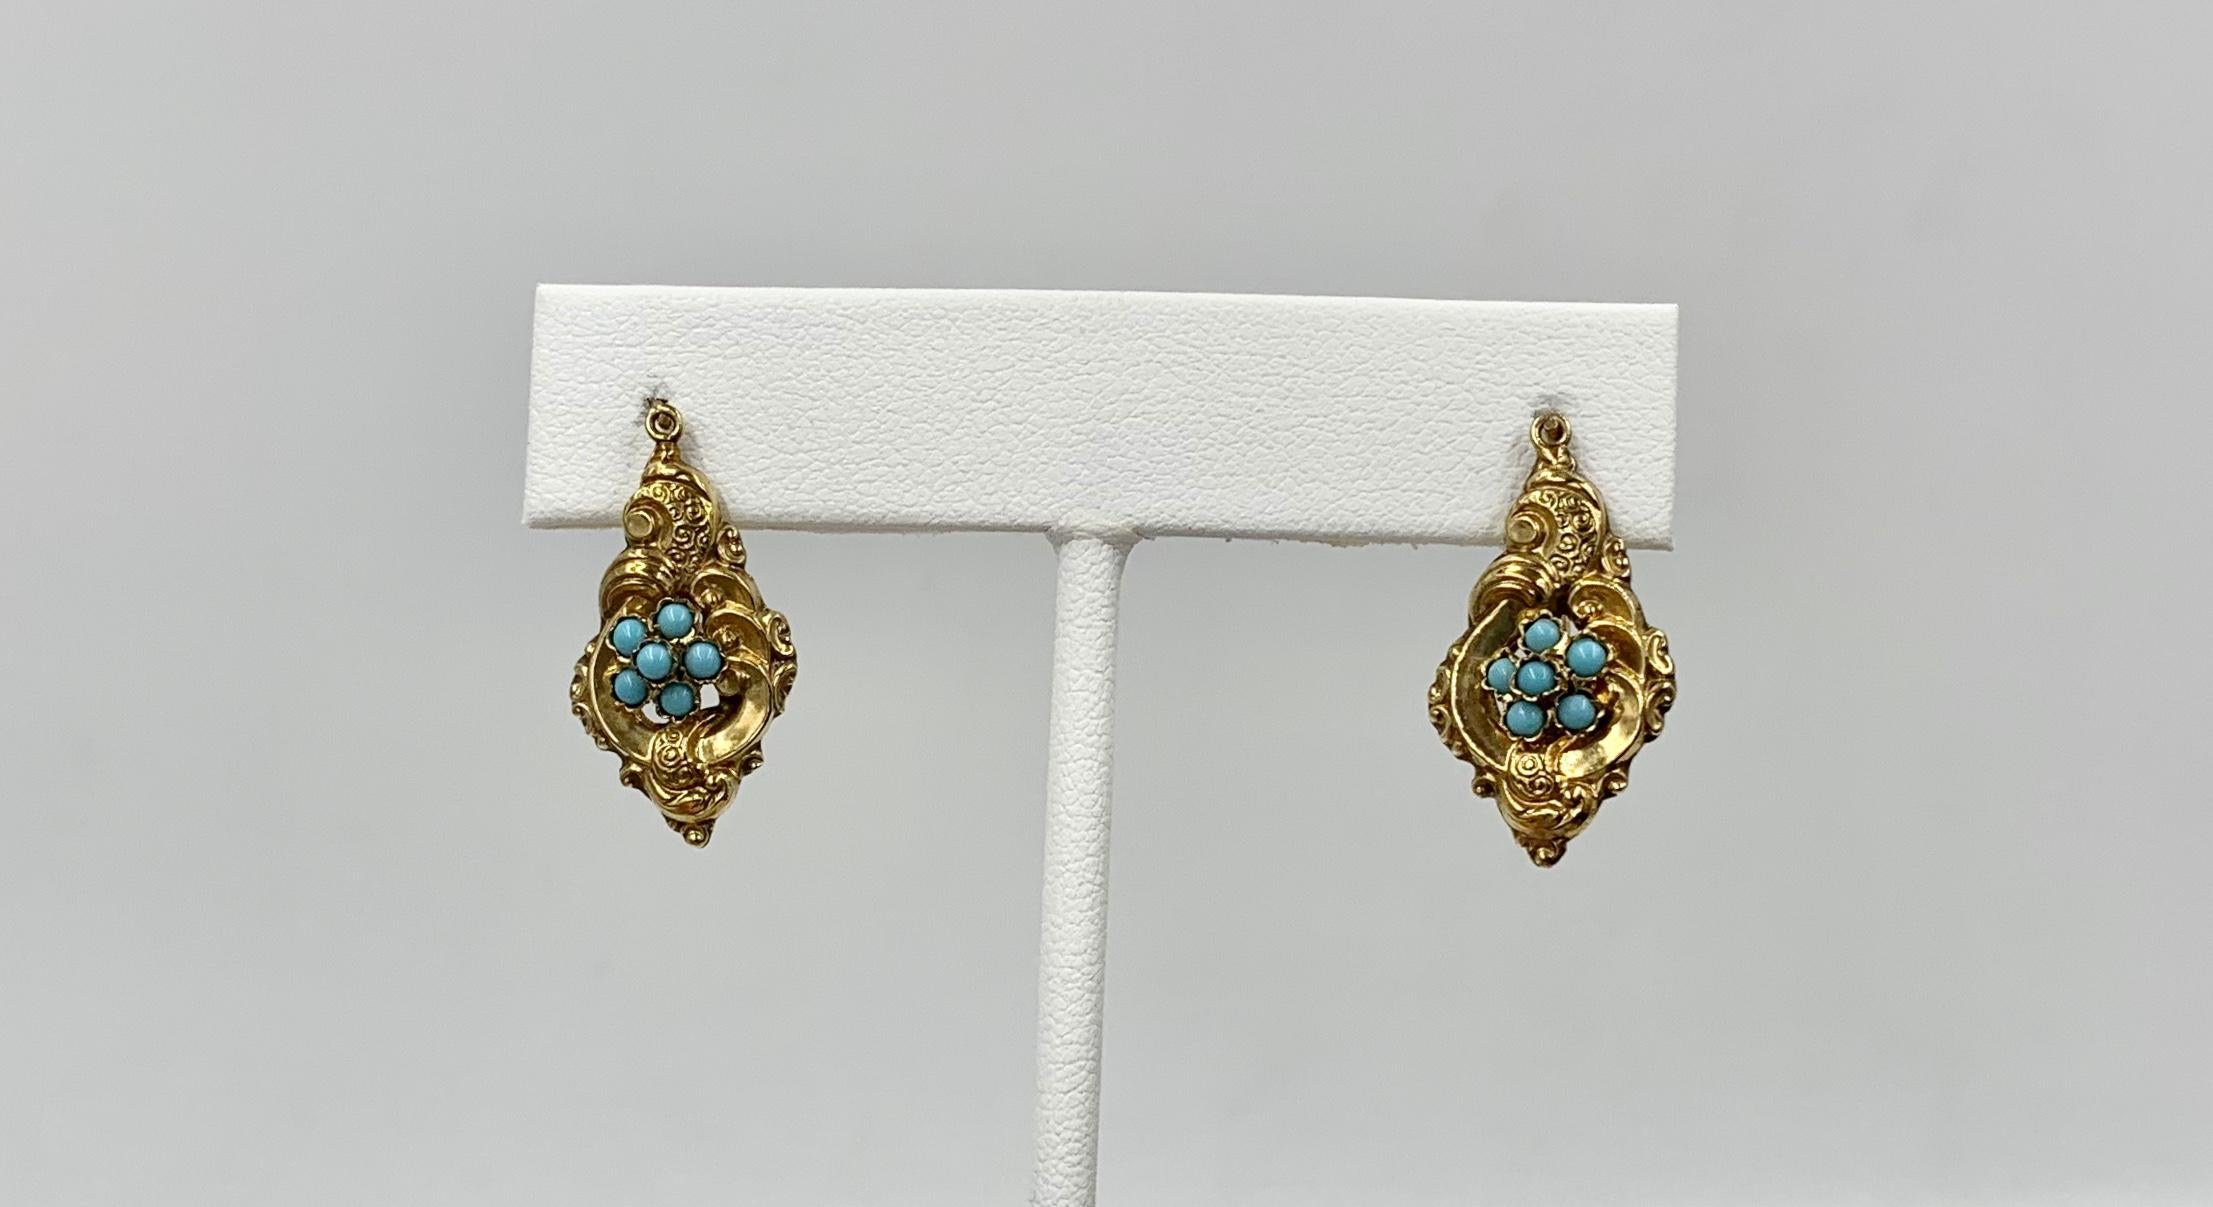 A rare pair of Persian Turquoise Victorian Flower Motif Dangle Drop Earrings in 10 Karat Gold.  The exquisite earrings have a Forget Me Not flower in the center with Persian Turquoise cabochons.  The color of the Turquoise is absolutely wonderful. 